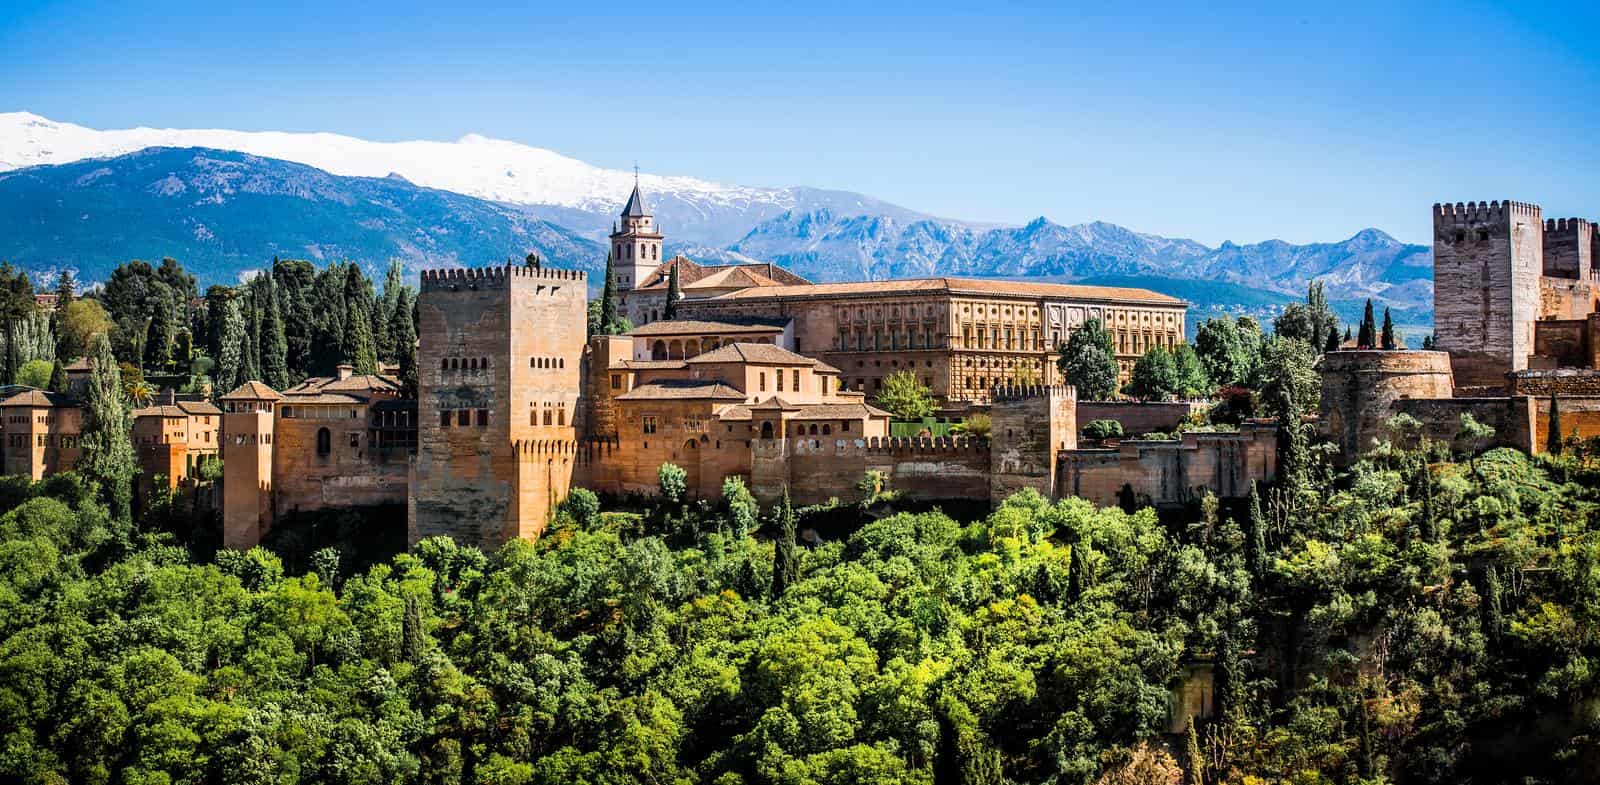 View of the famous Alhambra, Granada in Spain